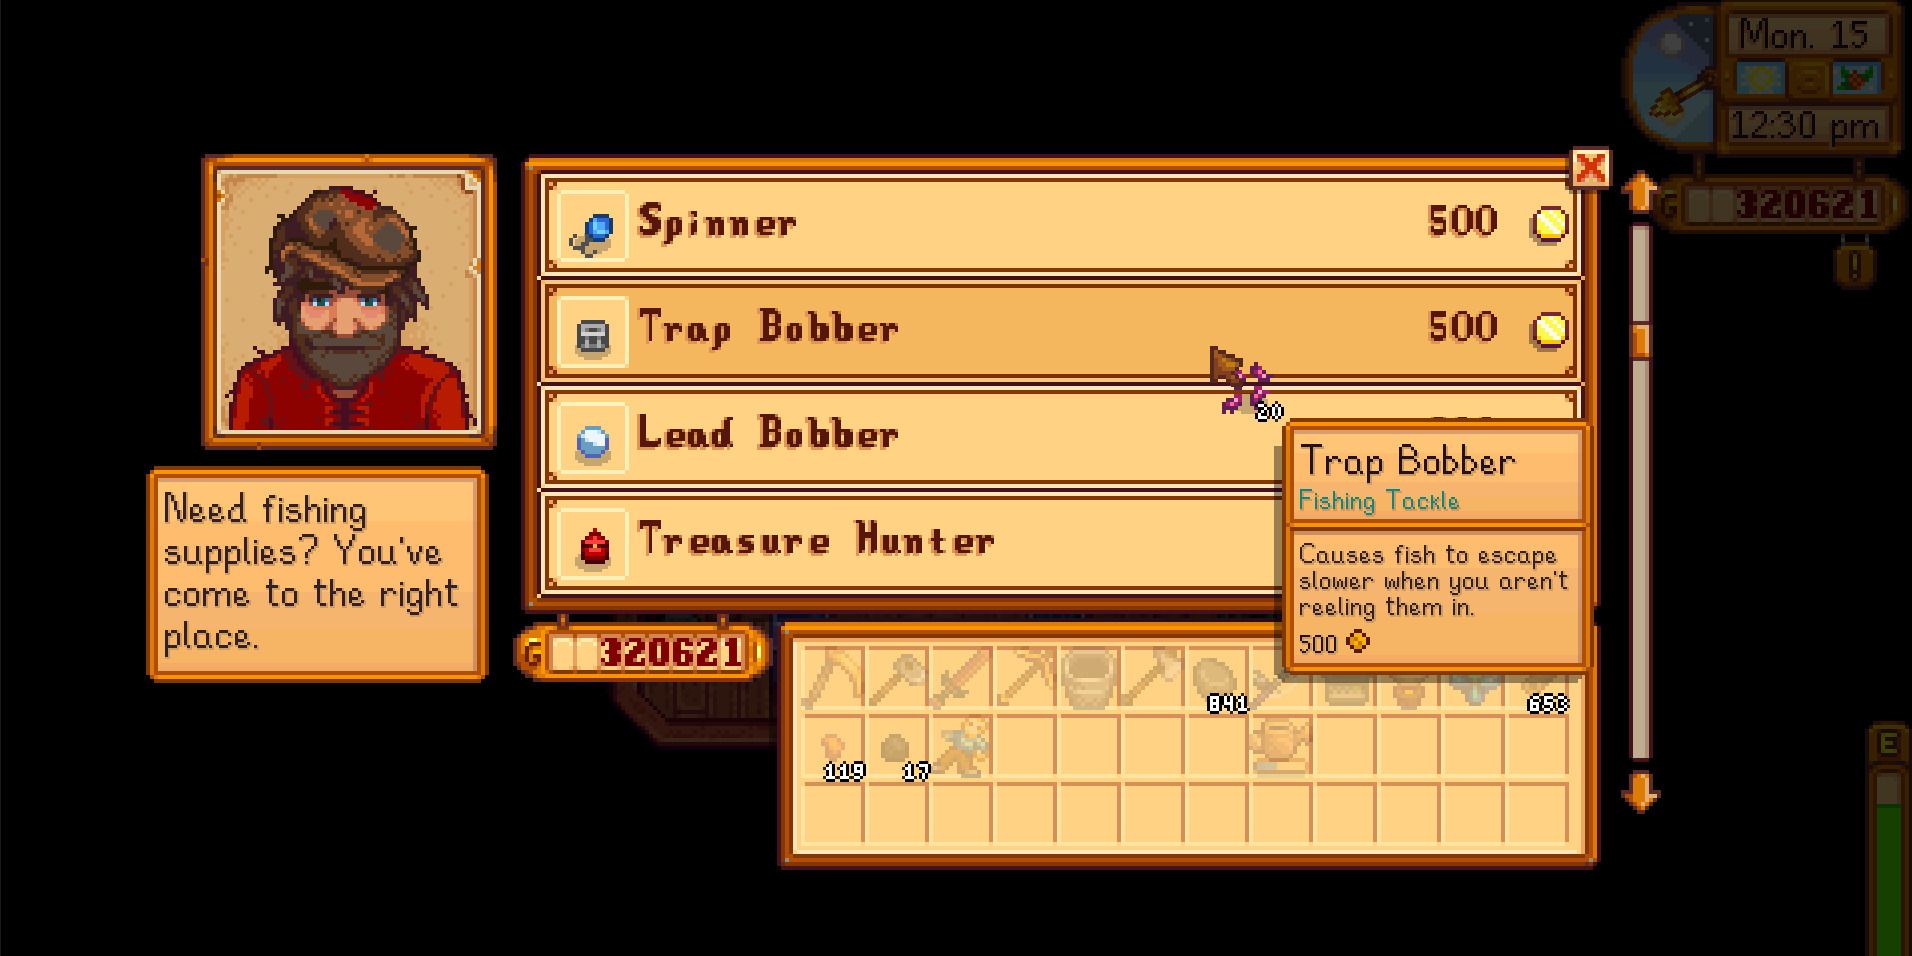 Image of the Trap Bobber available for purchase from Willy in Stardew Valley